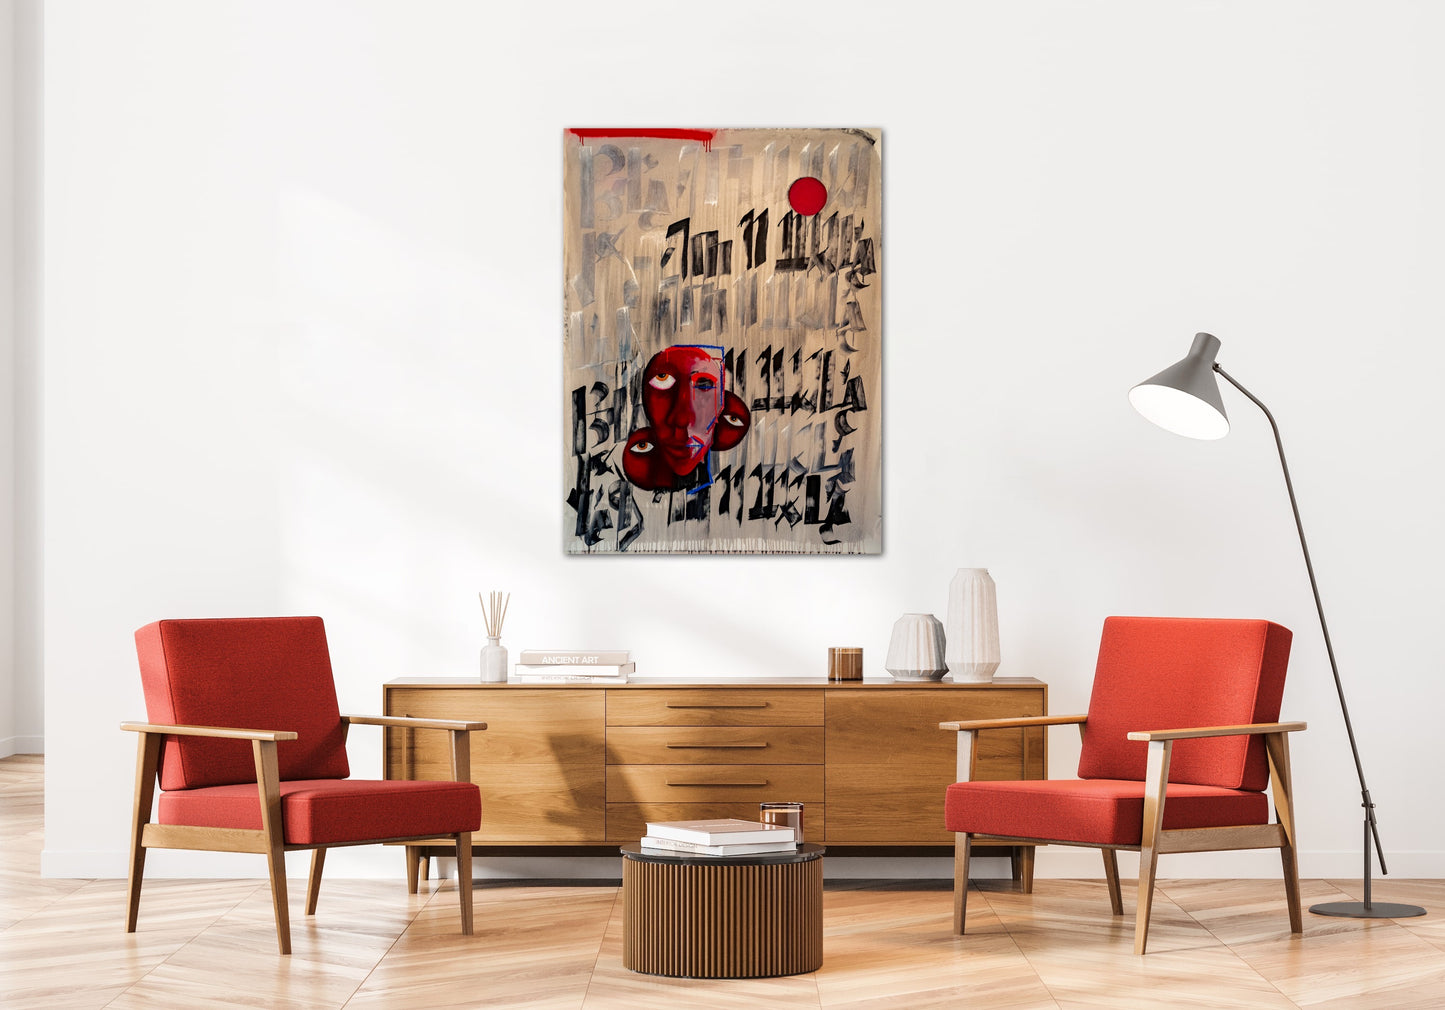 BELOVED AM I THE (CANVAS PRINT) 40x28"